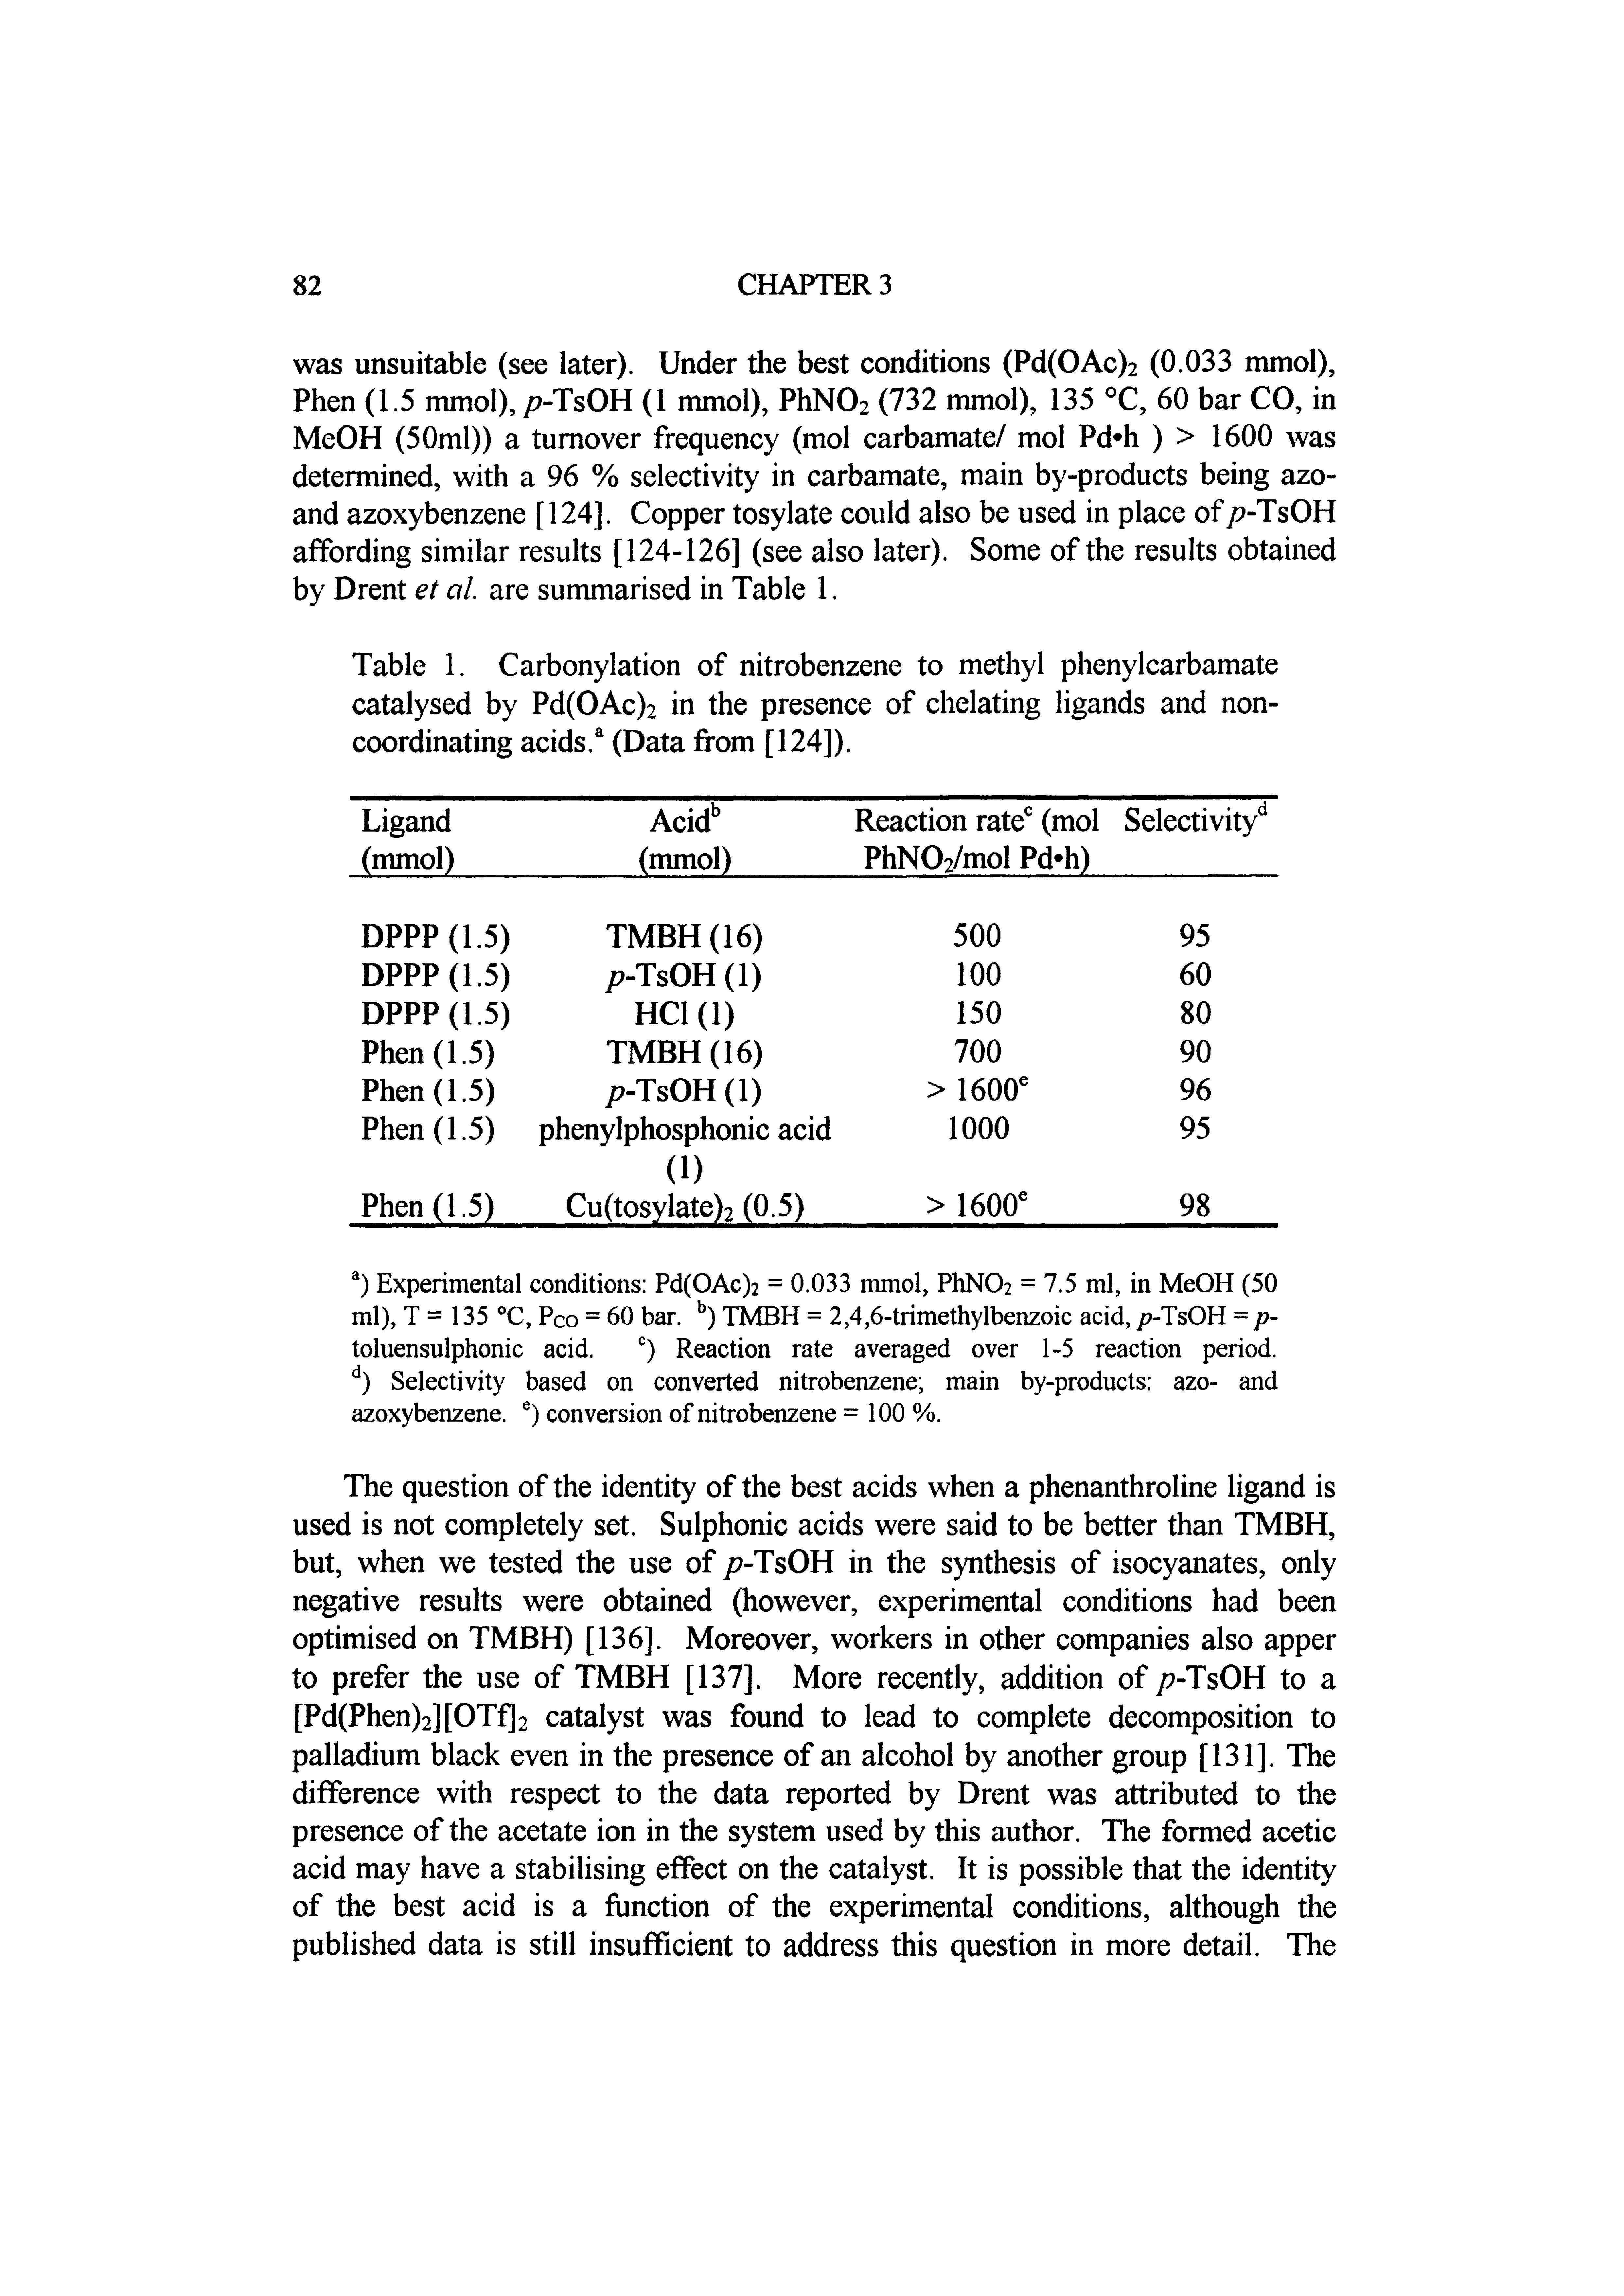 Table 1. Carbonylation of nitrobenzene to methyl phenylcarbamate catalysed by Pd(OAc)2 in the presence of chelating ligands and noncoordinating acids. (Data from [124]).